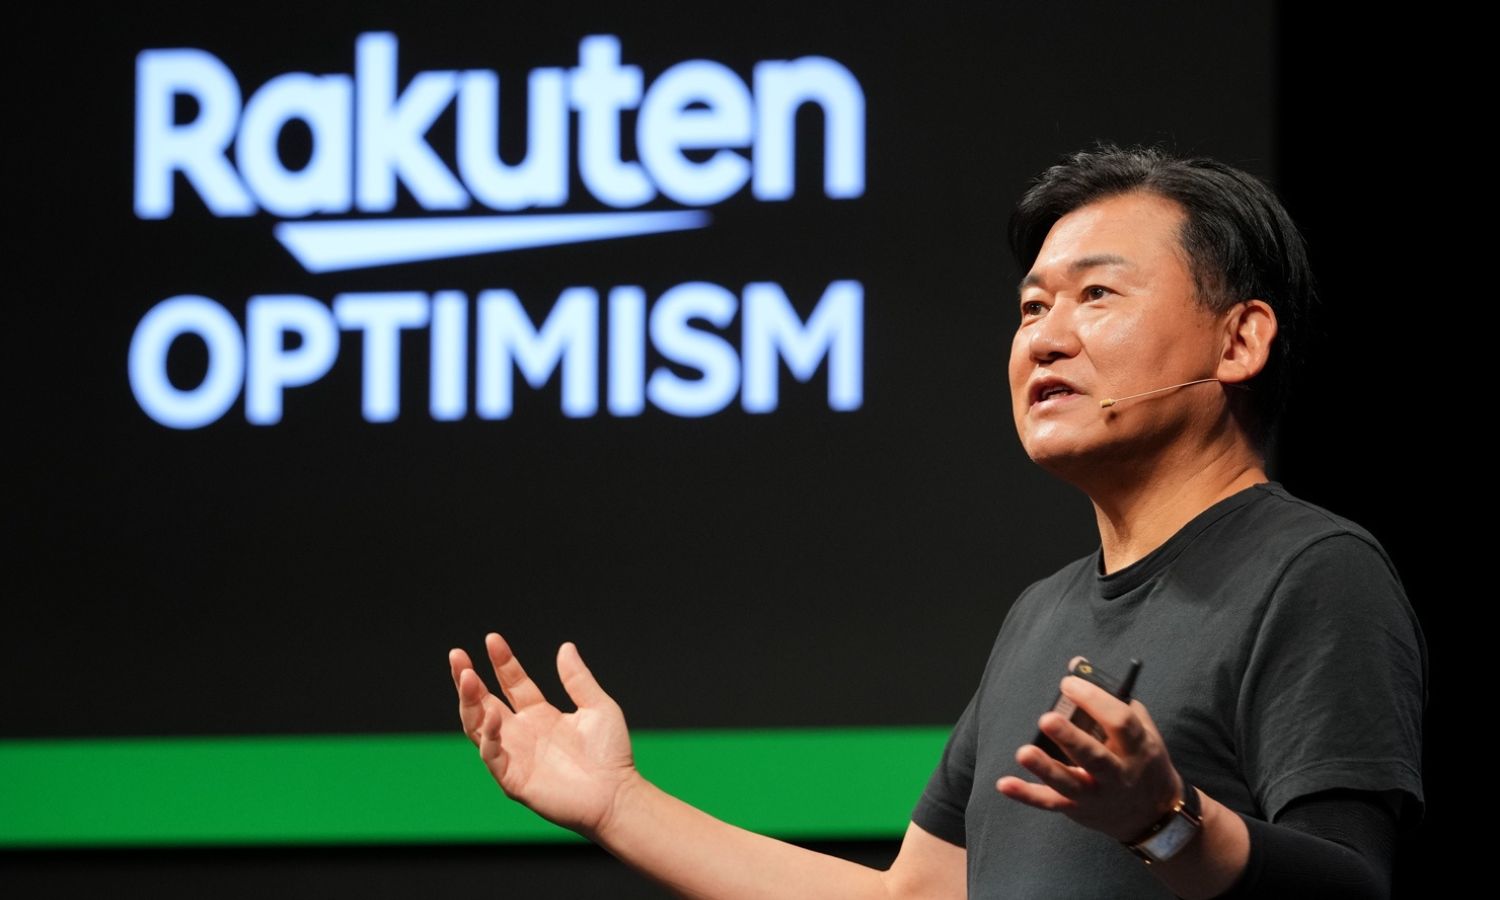 Rakuten Group Chairman & CEO Mickey Mikitani addressed the importance of becoming a leader in green during the Rakuten Optimism 2022 business conference.